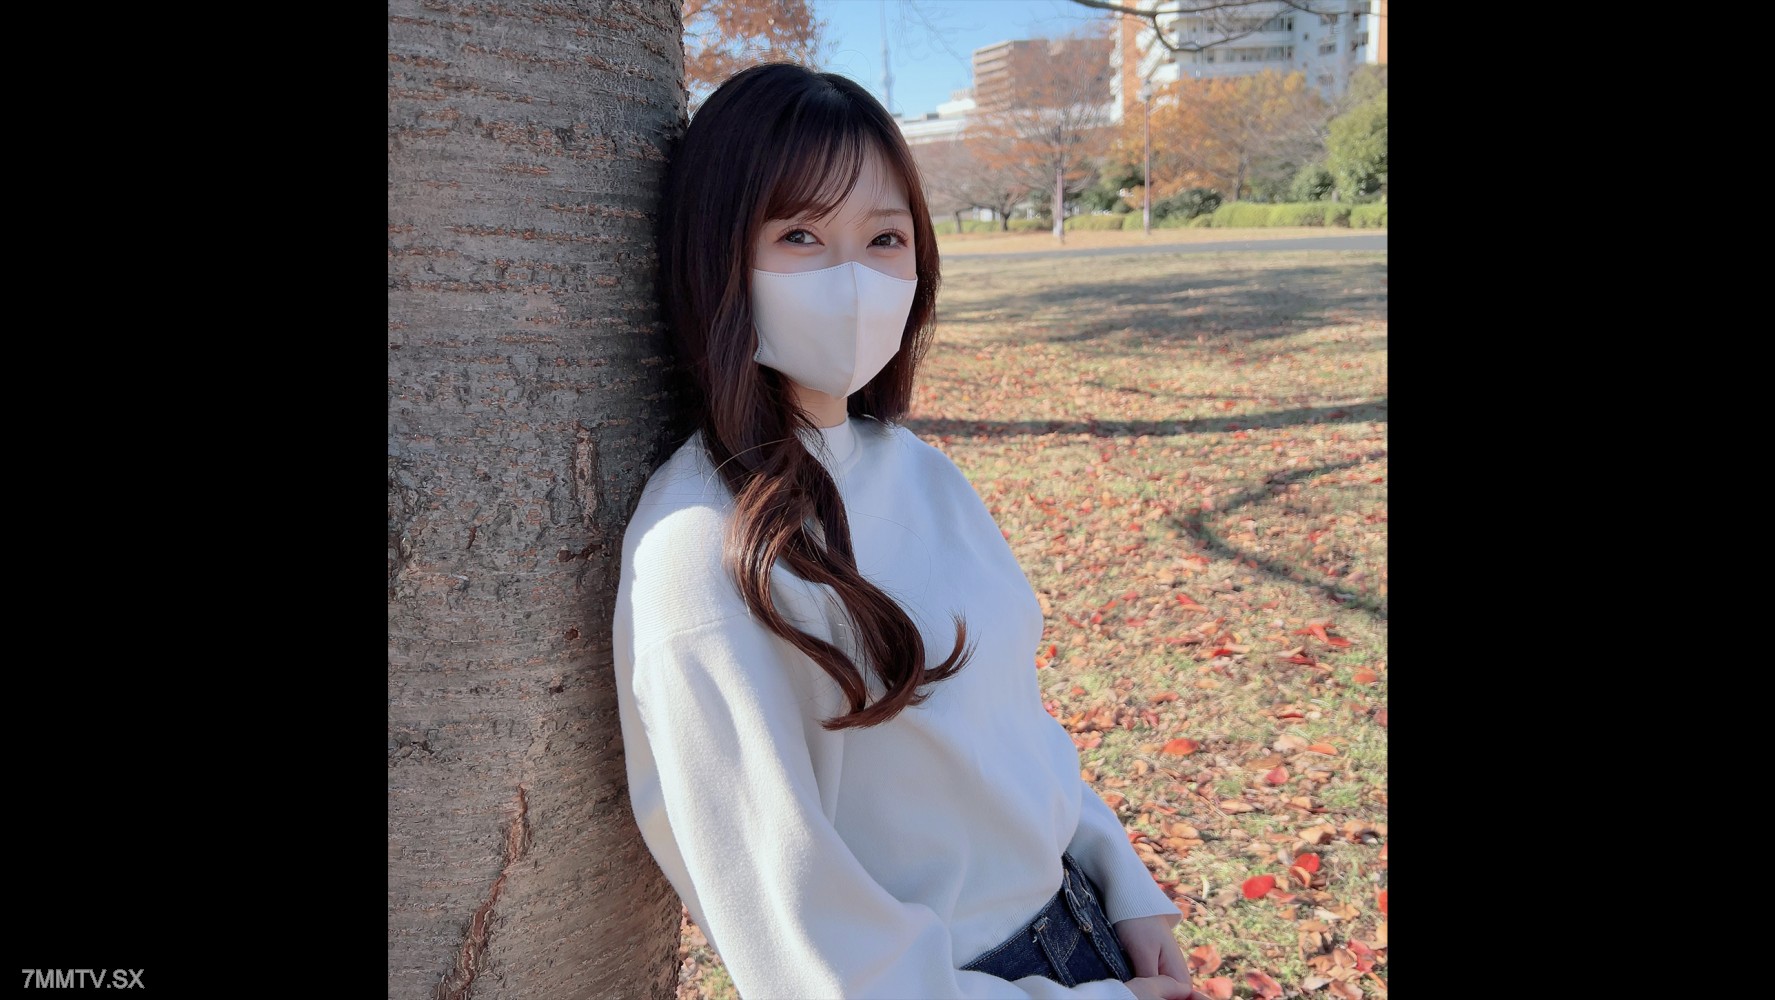 FC2-PPV-4356814 Shoujibisutatsu/Outside! Limited to 3 days! Now, the next edition of the Tenshu has been completed, and the b...re education student's closet! An act of obscenity that is expressed on the surface of the public! ③ Roshi's guidebook... 